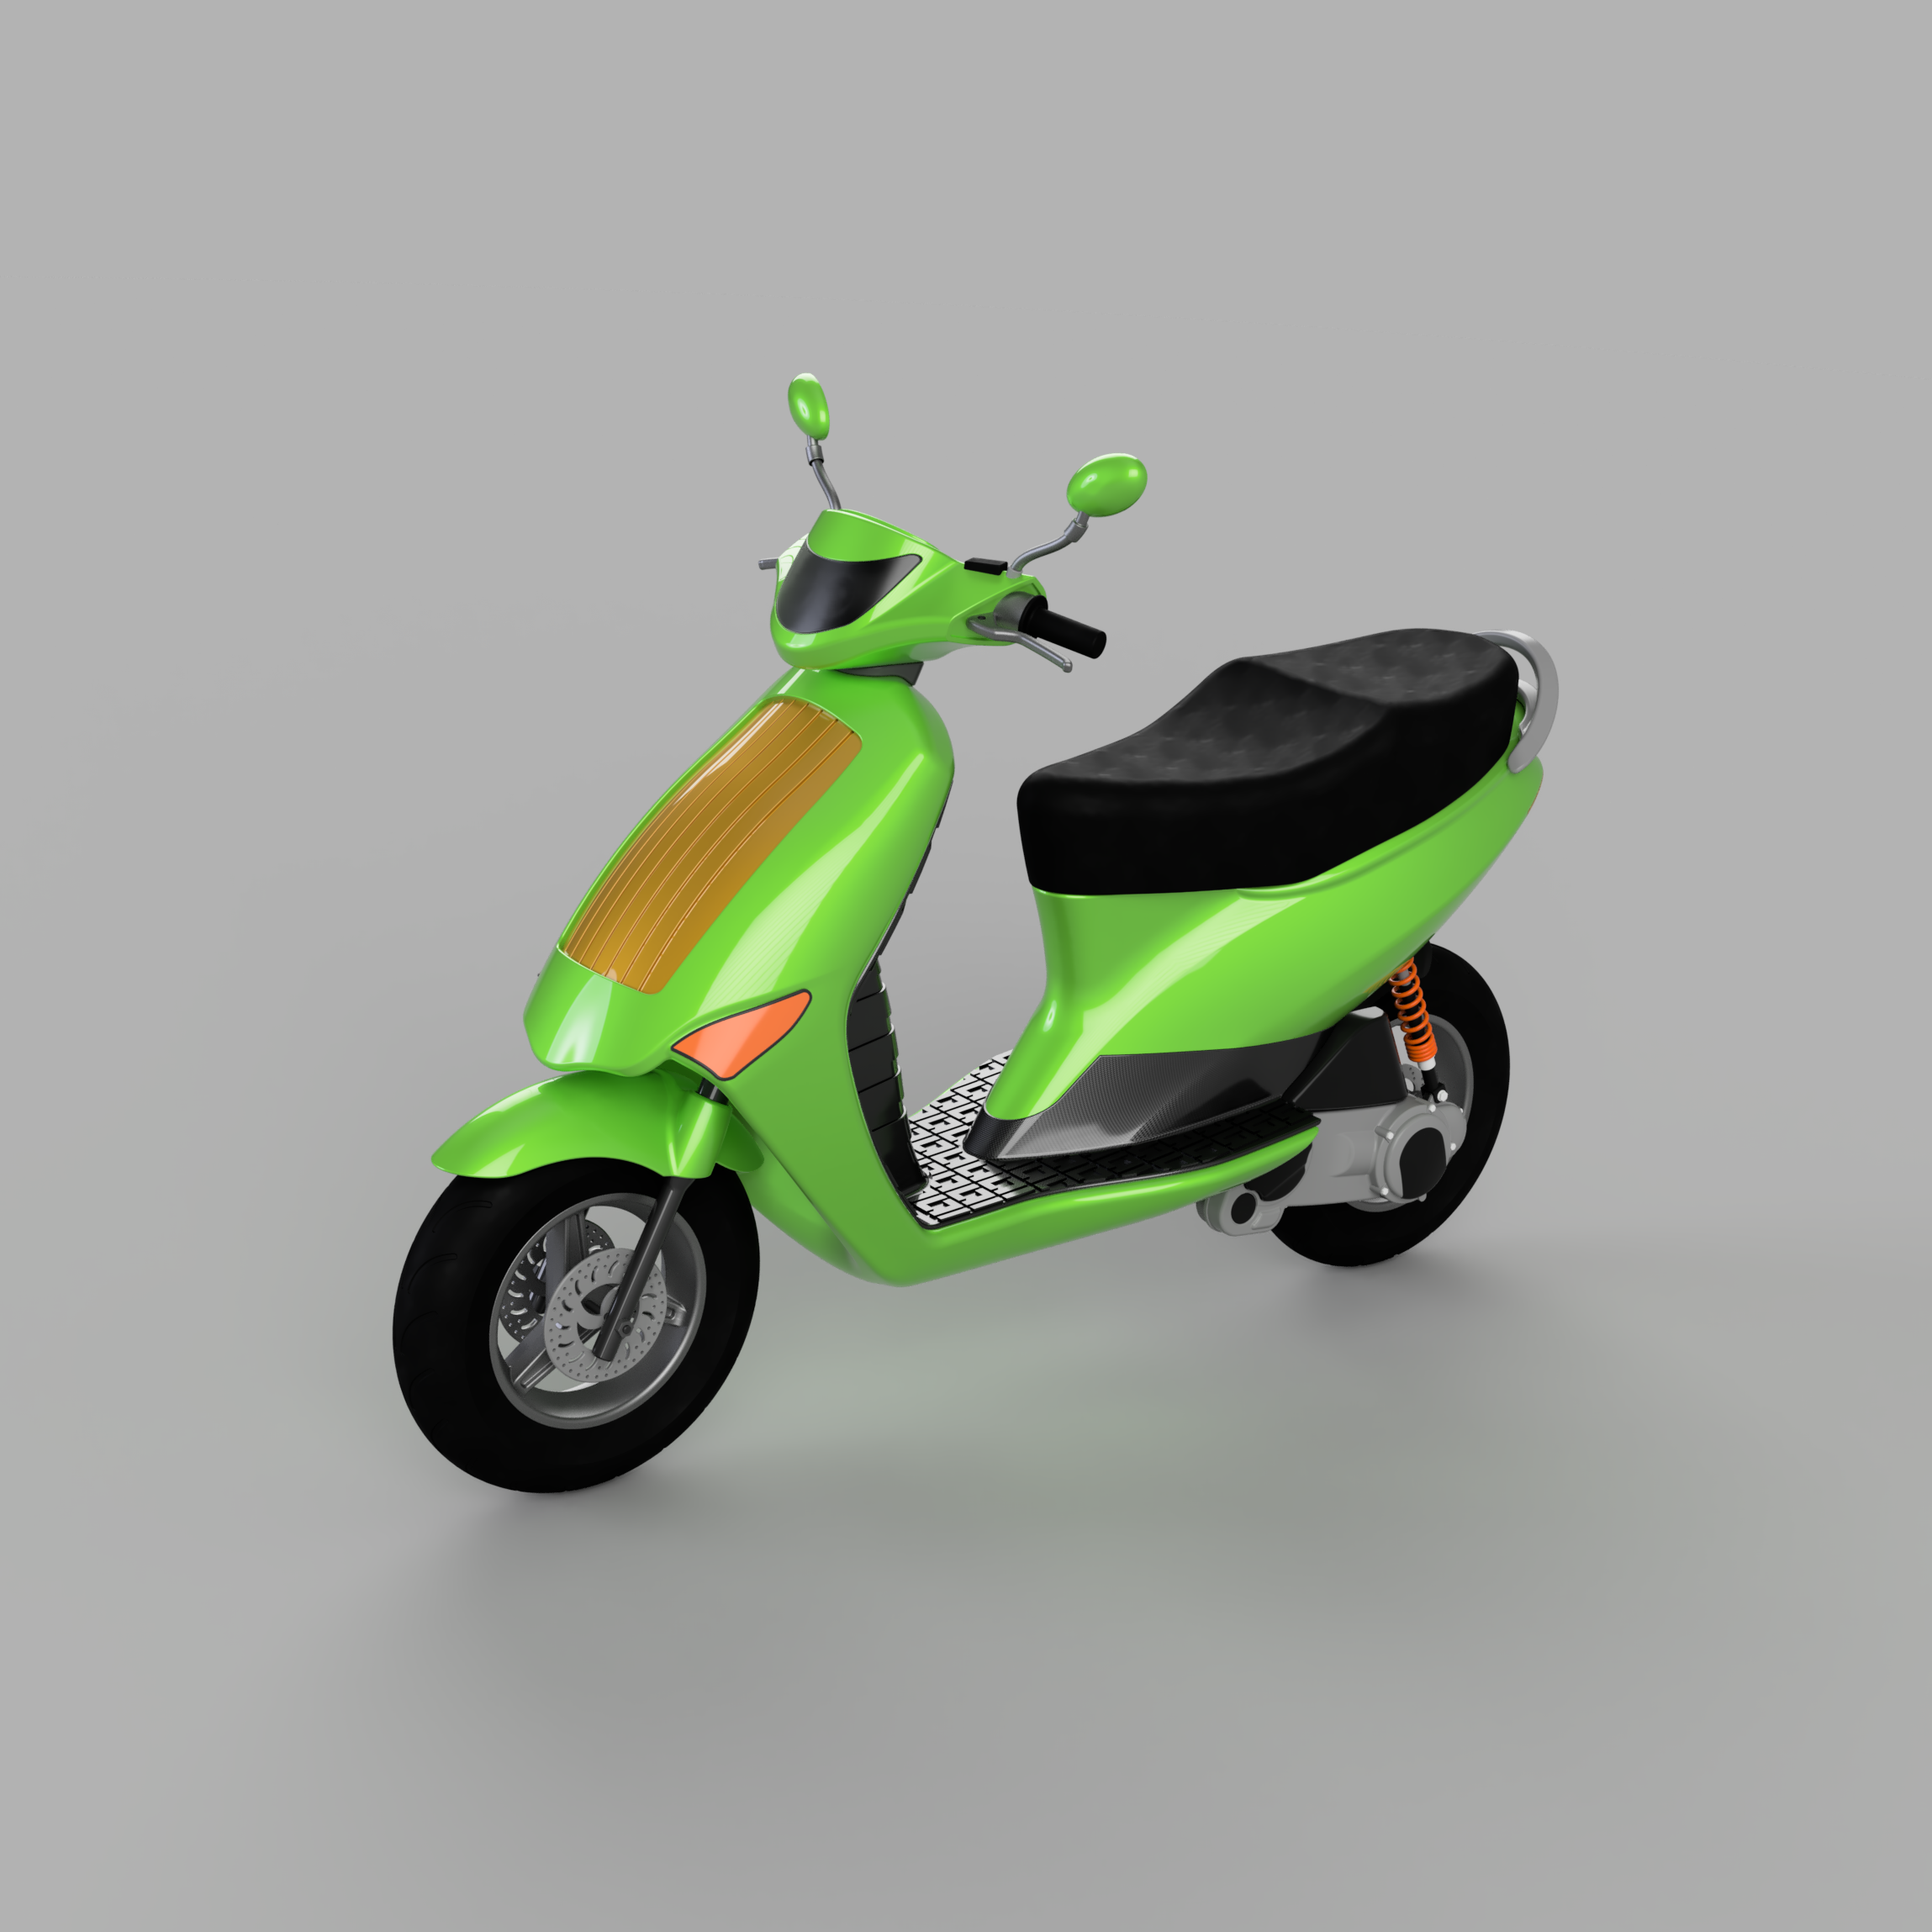 Scooter-3_2023-Jan-23_03-52-22PM-000_CustomizedView12708193419